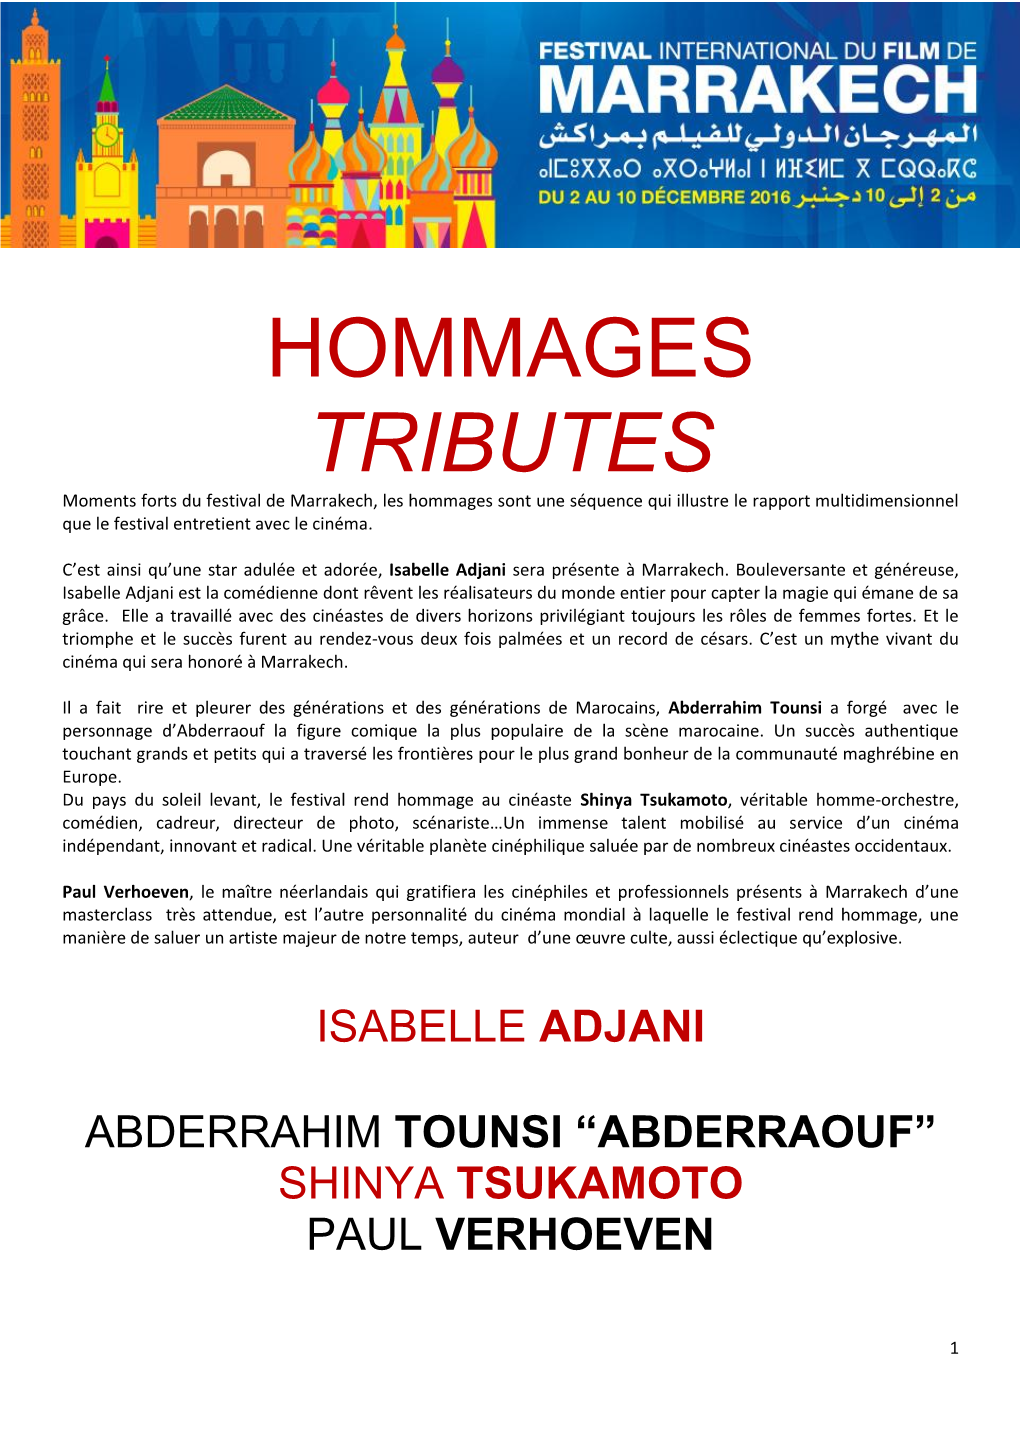 Hommages Tributes